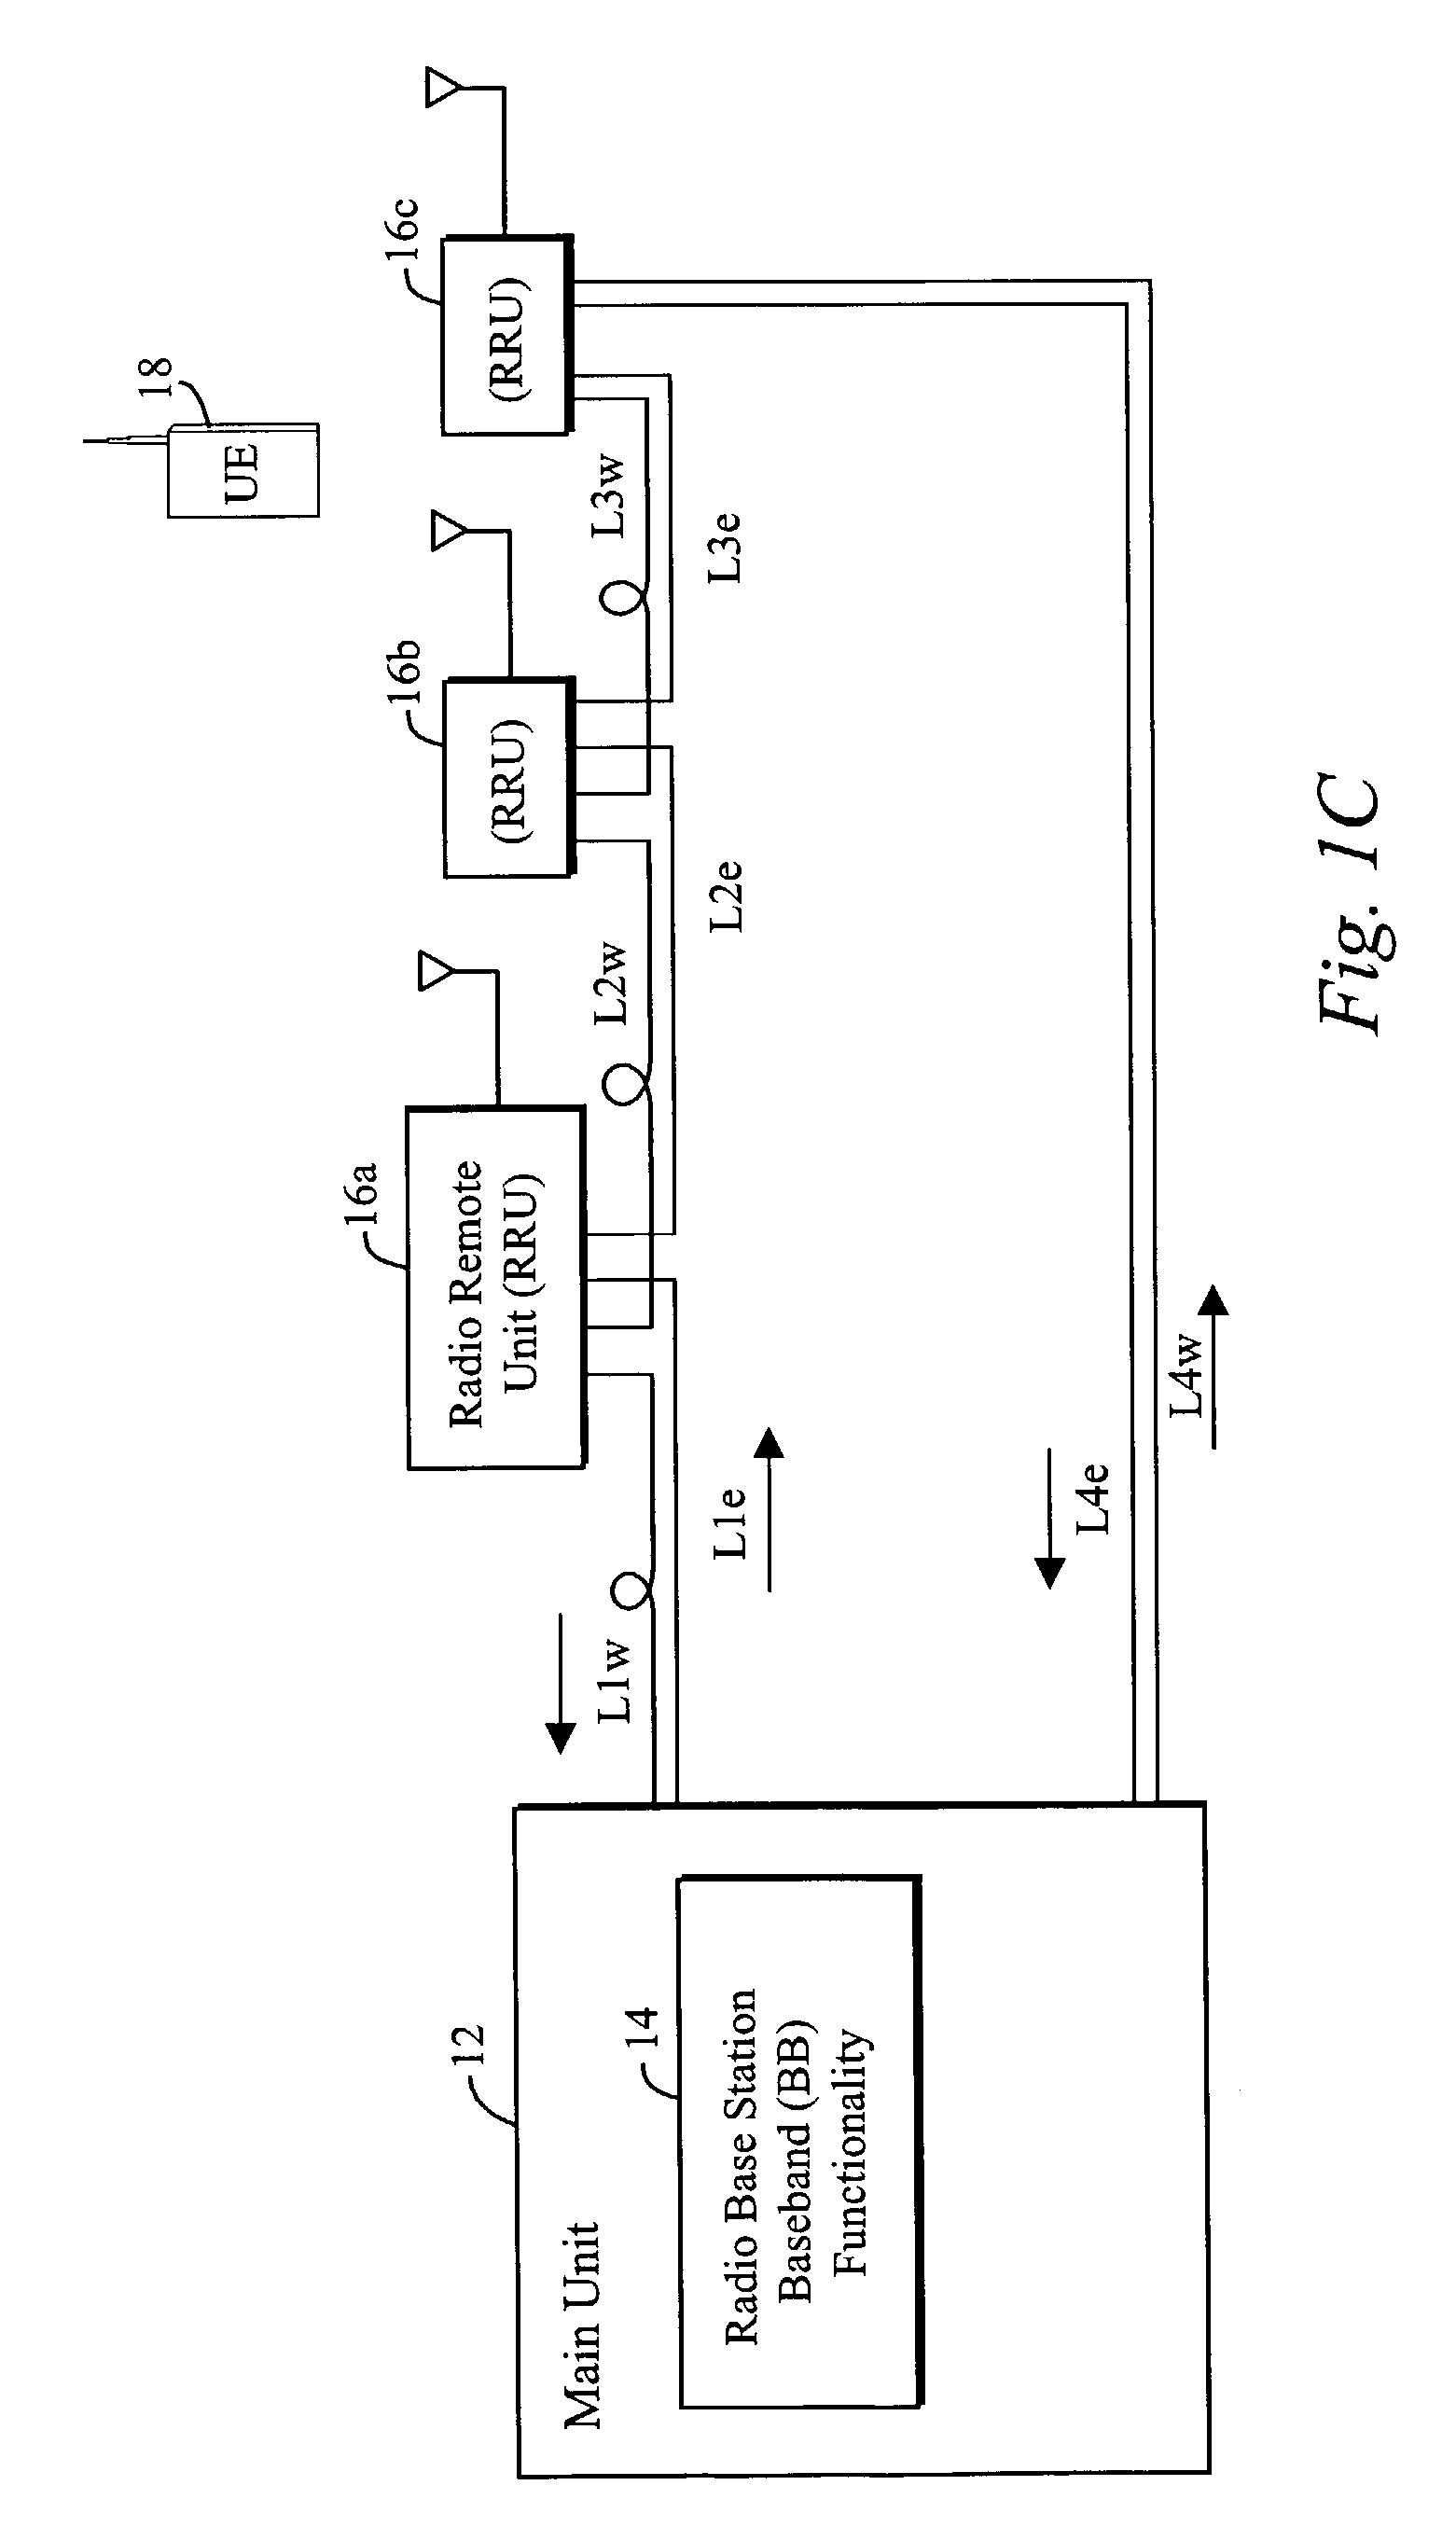 Optical fiber coupling configurations for a main-remote radio base station and a hybrid radio base station